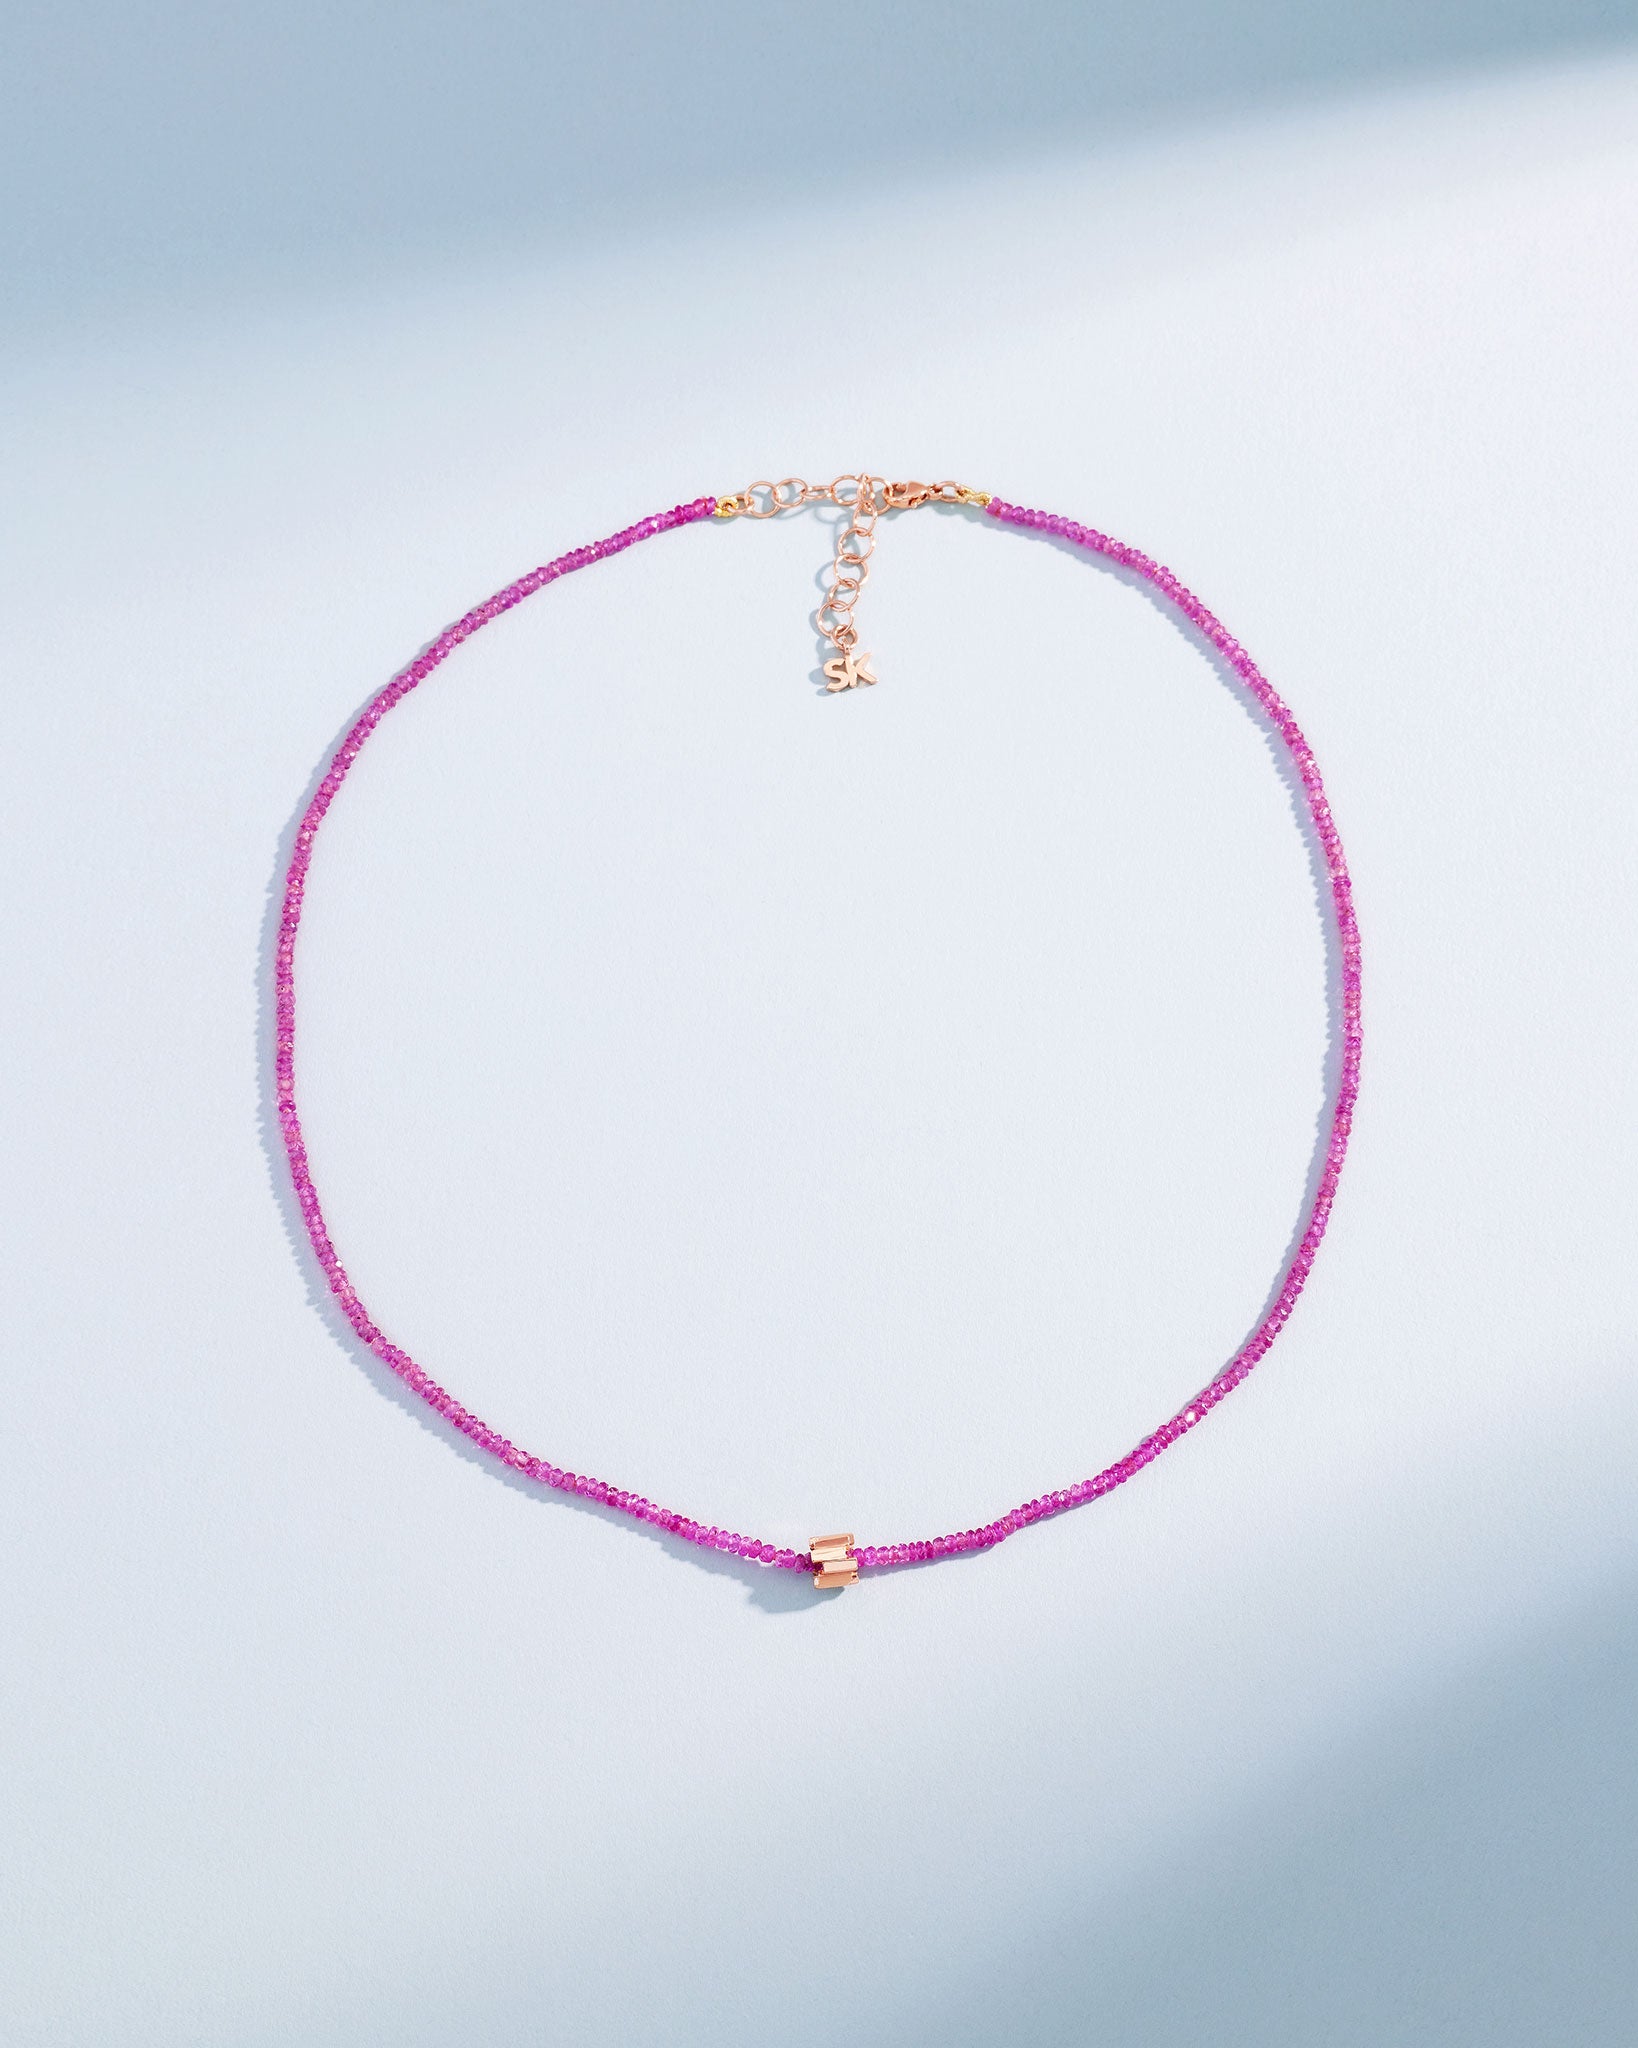 Suzanne Kalan Infinite Beaded Pink Spinel & Mini Golden Rondelle Necklace in 18k rose gold